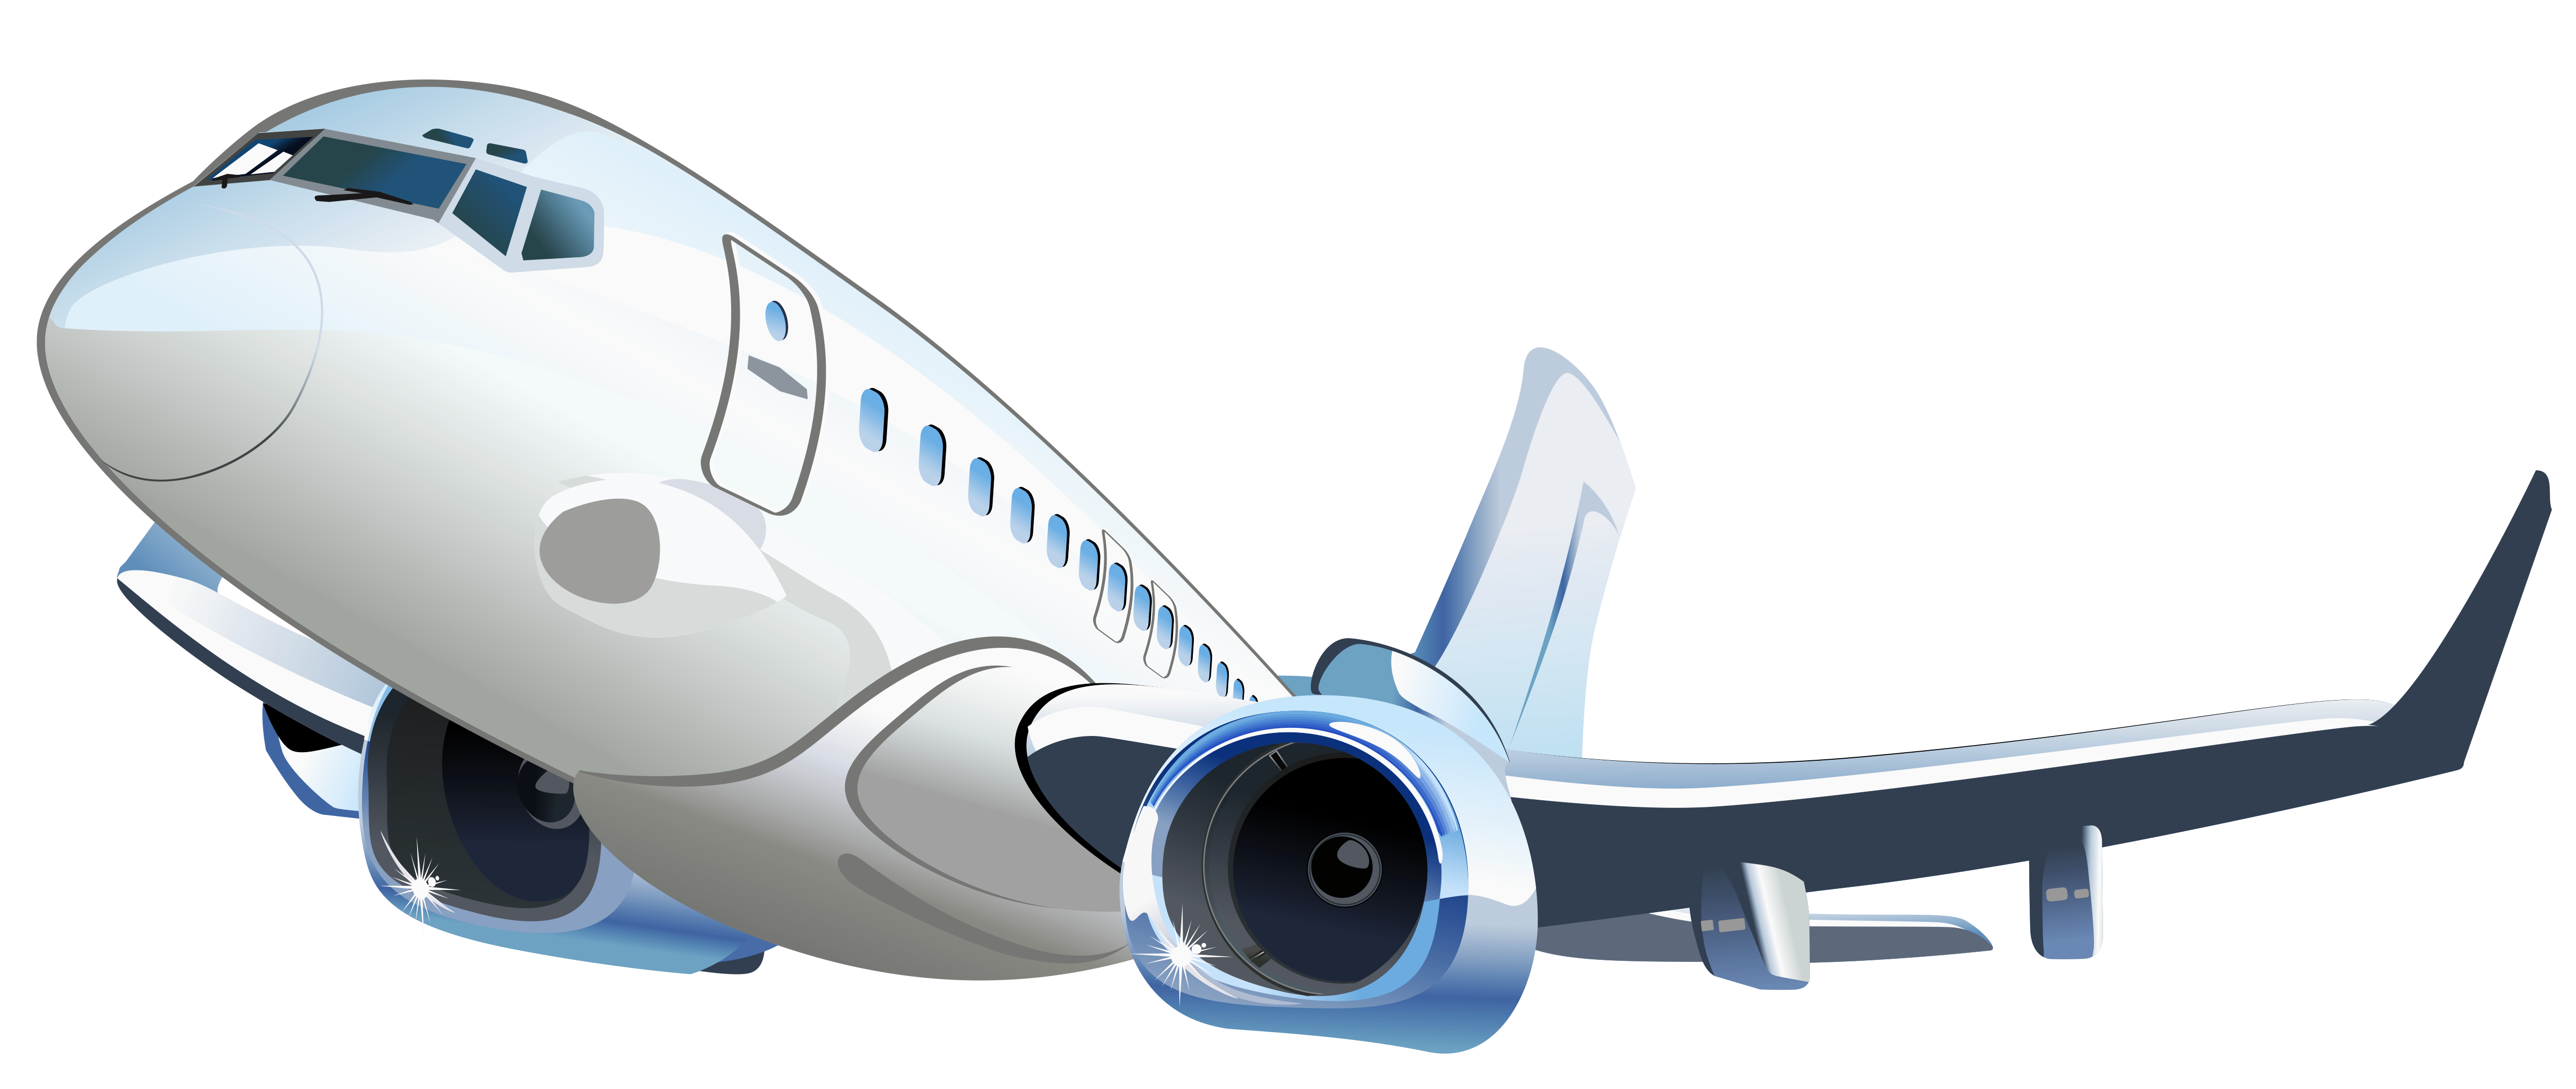 Airplane PNG Background Image